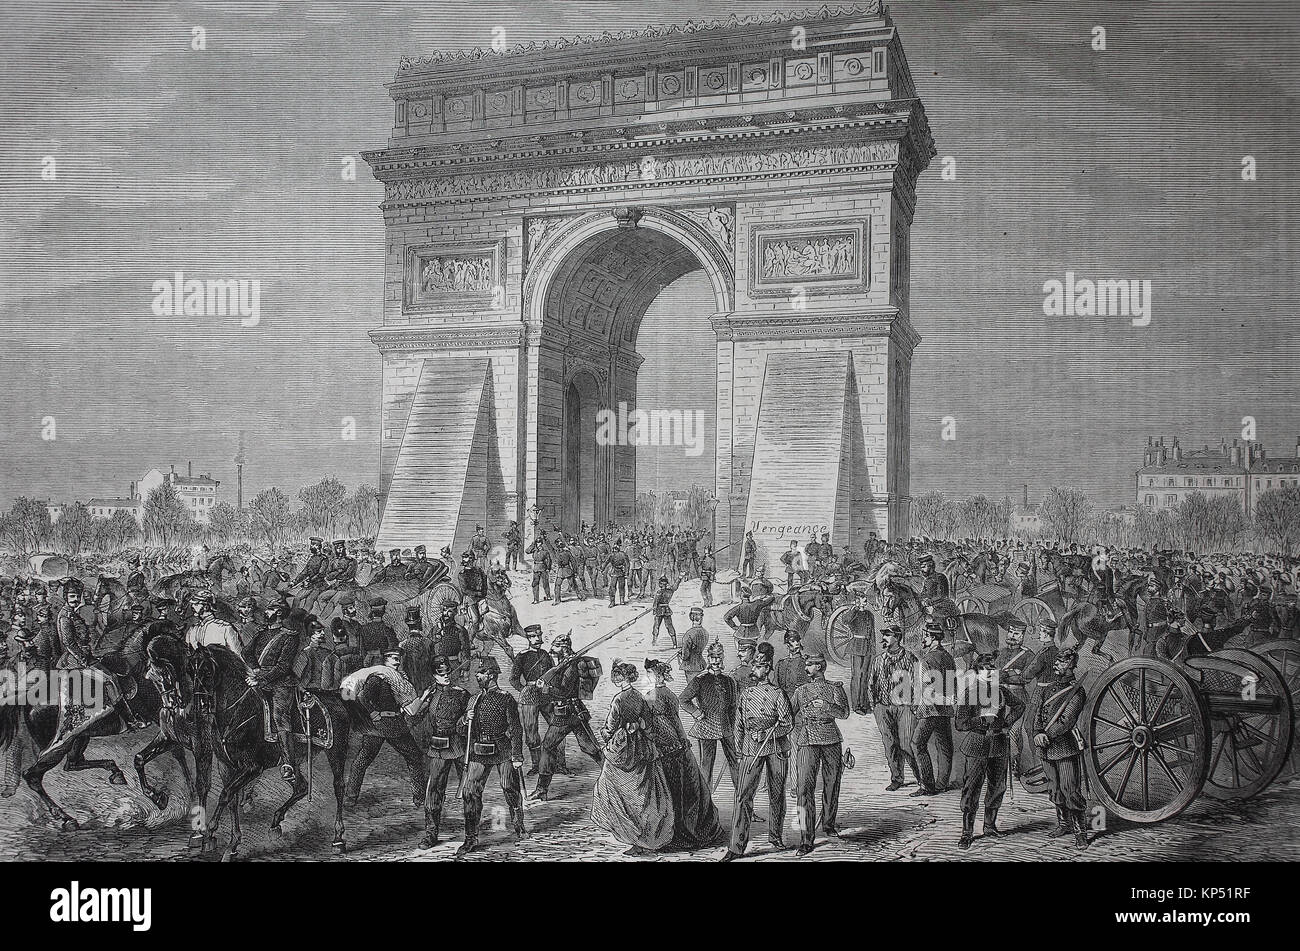 On the triumphal arch in Paris, during the stay of the German soldiers on March 2, 1871, France, time of the Franco-Prussian War or Franco-German War, Deutsch-Franzoesischer Krieg, 1870 - 1871, digital improved reproduction of an original woodcut from 1871 Stock Photo